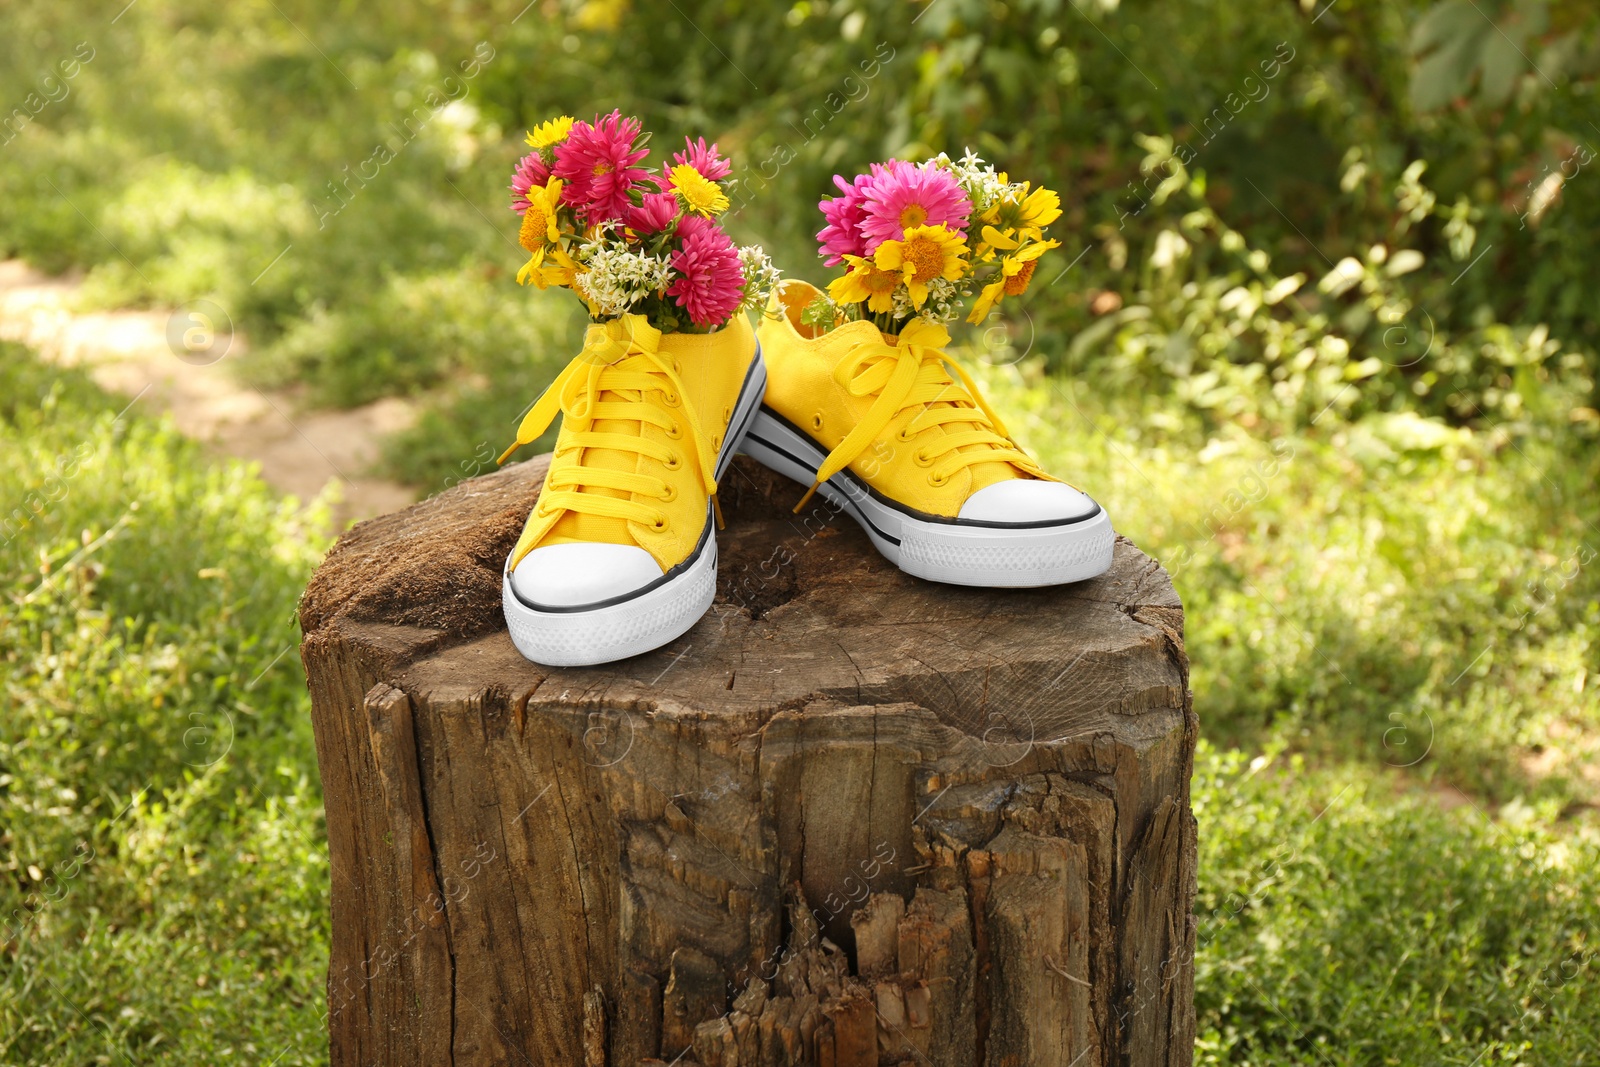 Photo of Shoes with beautiful flowers on tree stump outdoors